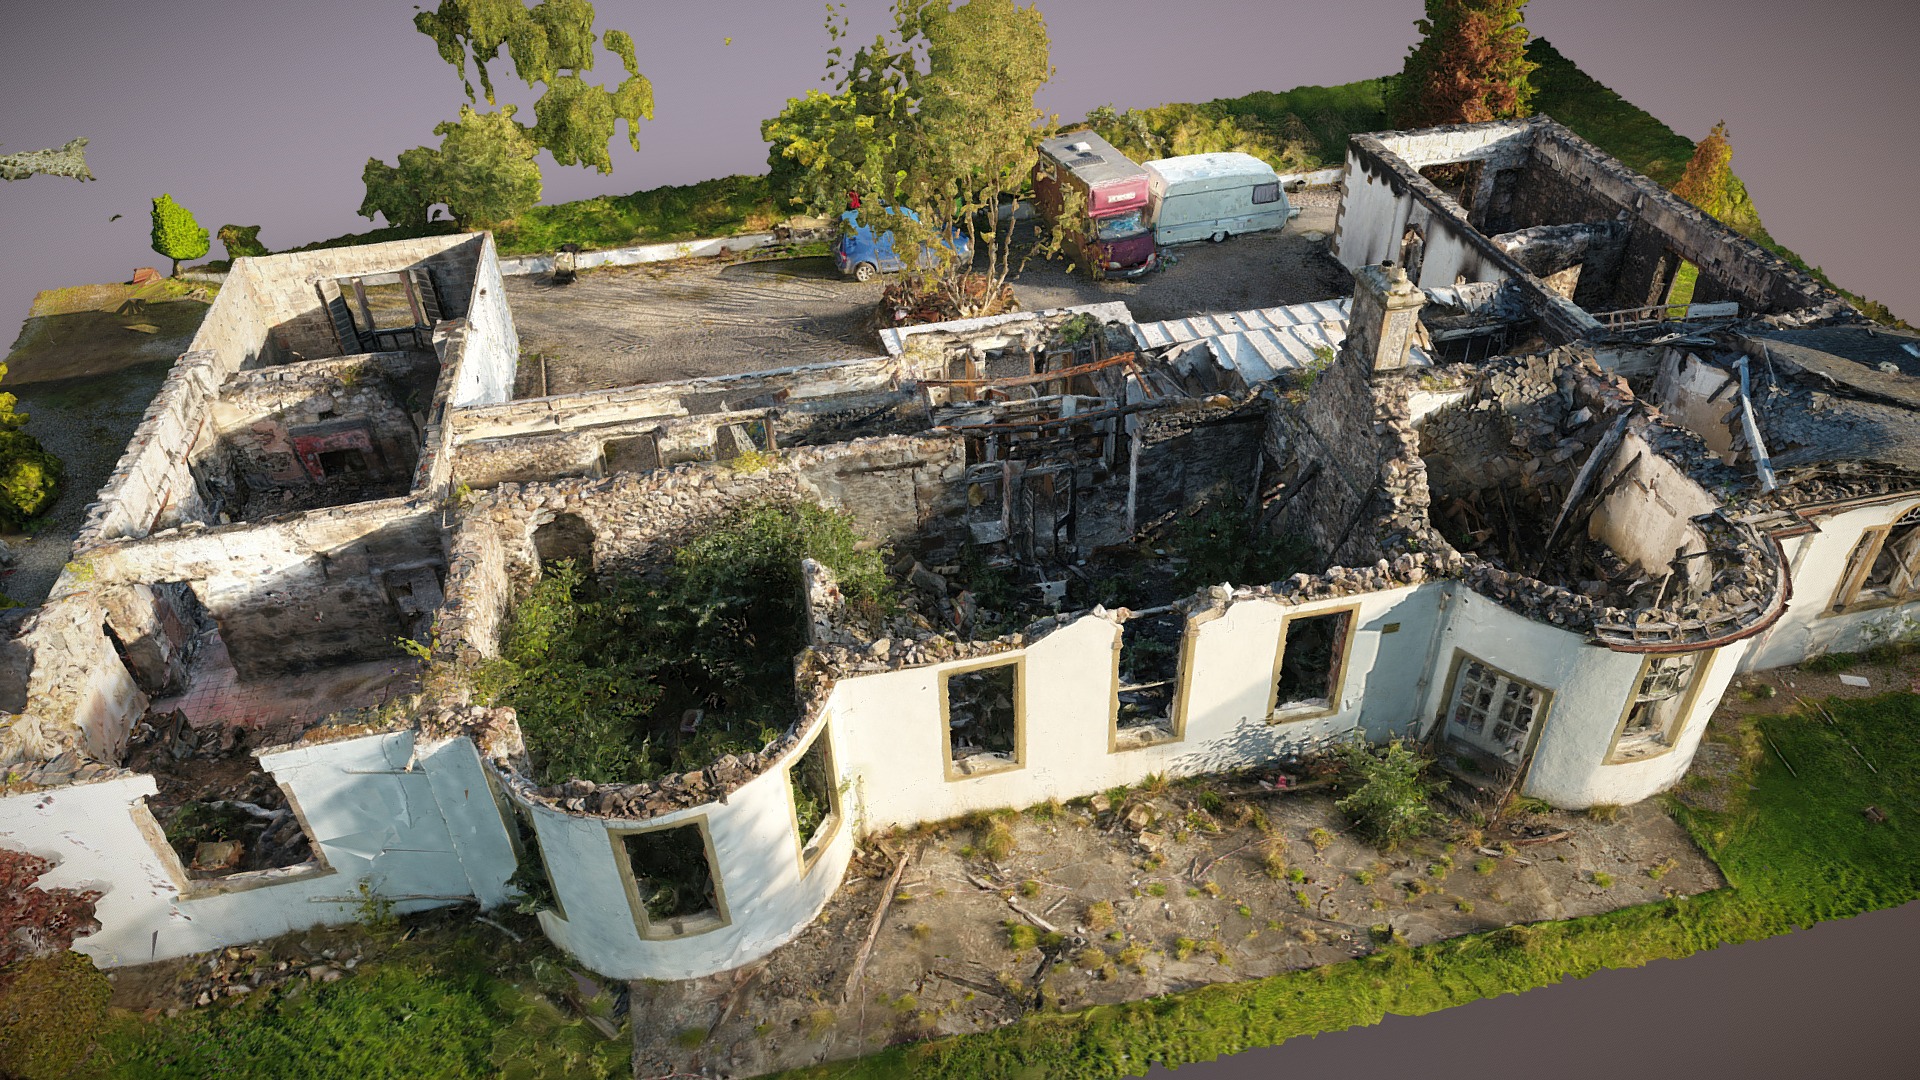 3D model Boleskine House Loch Ness - This is a 3D model of the Boleskine House Loch Ness. The 3D model is about a destroyed house with a few cars parked in the driveway.